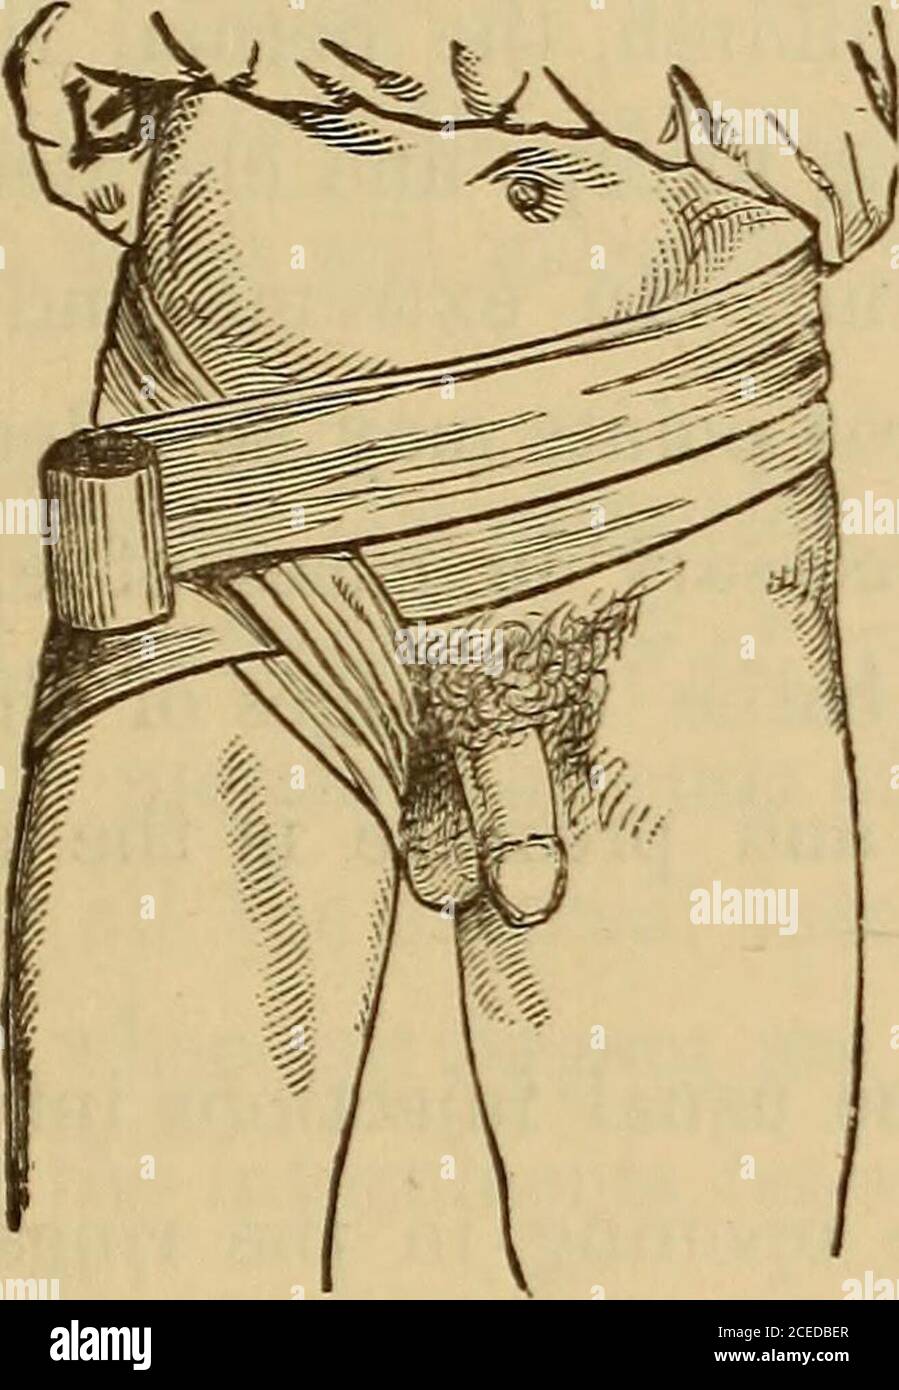 . Hernia, strangulated and reducible. With cure by subcutaneous injections, together with sugcested [!] and improved methods for kelotomy. Also an appendix giving a short account of various new surgical instruments. kened and hypertrophied fromfriction. This is formed by friction of the truss and theHernia, and forms our landmark, for its curve is peculiarand not readily mistakable in making our definition. Forsimilar operation see Heat on en Rupture. The Hernia having now been reduced and the forefingerpressed against the outer edge of the falciform process, the AUTHORS OPERATION BY INJECTION Stock Photo